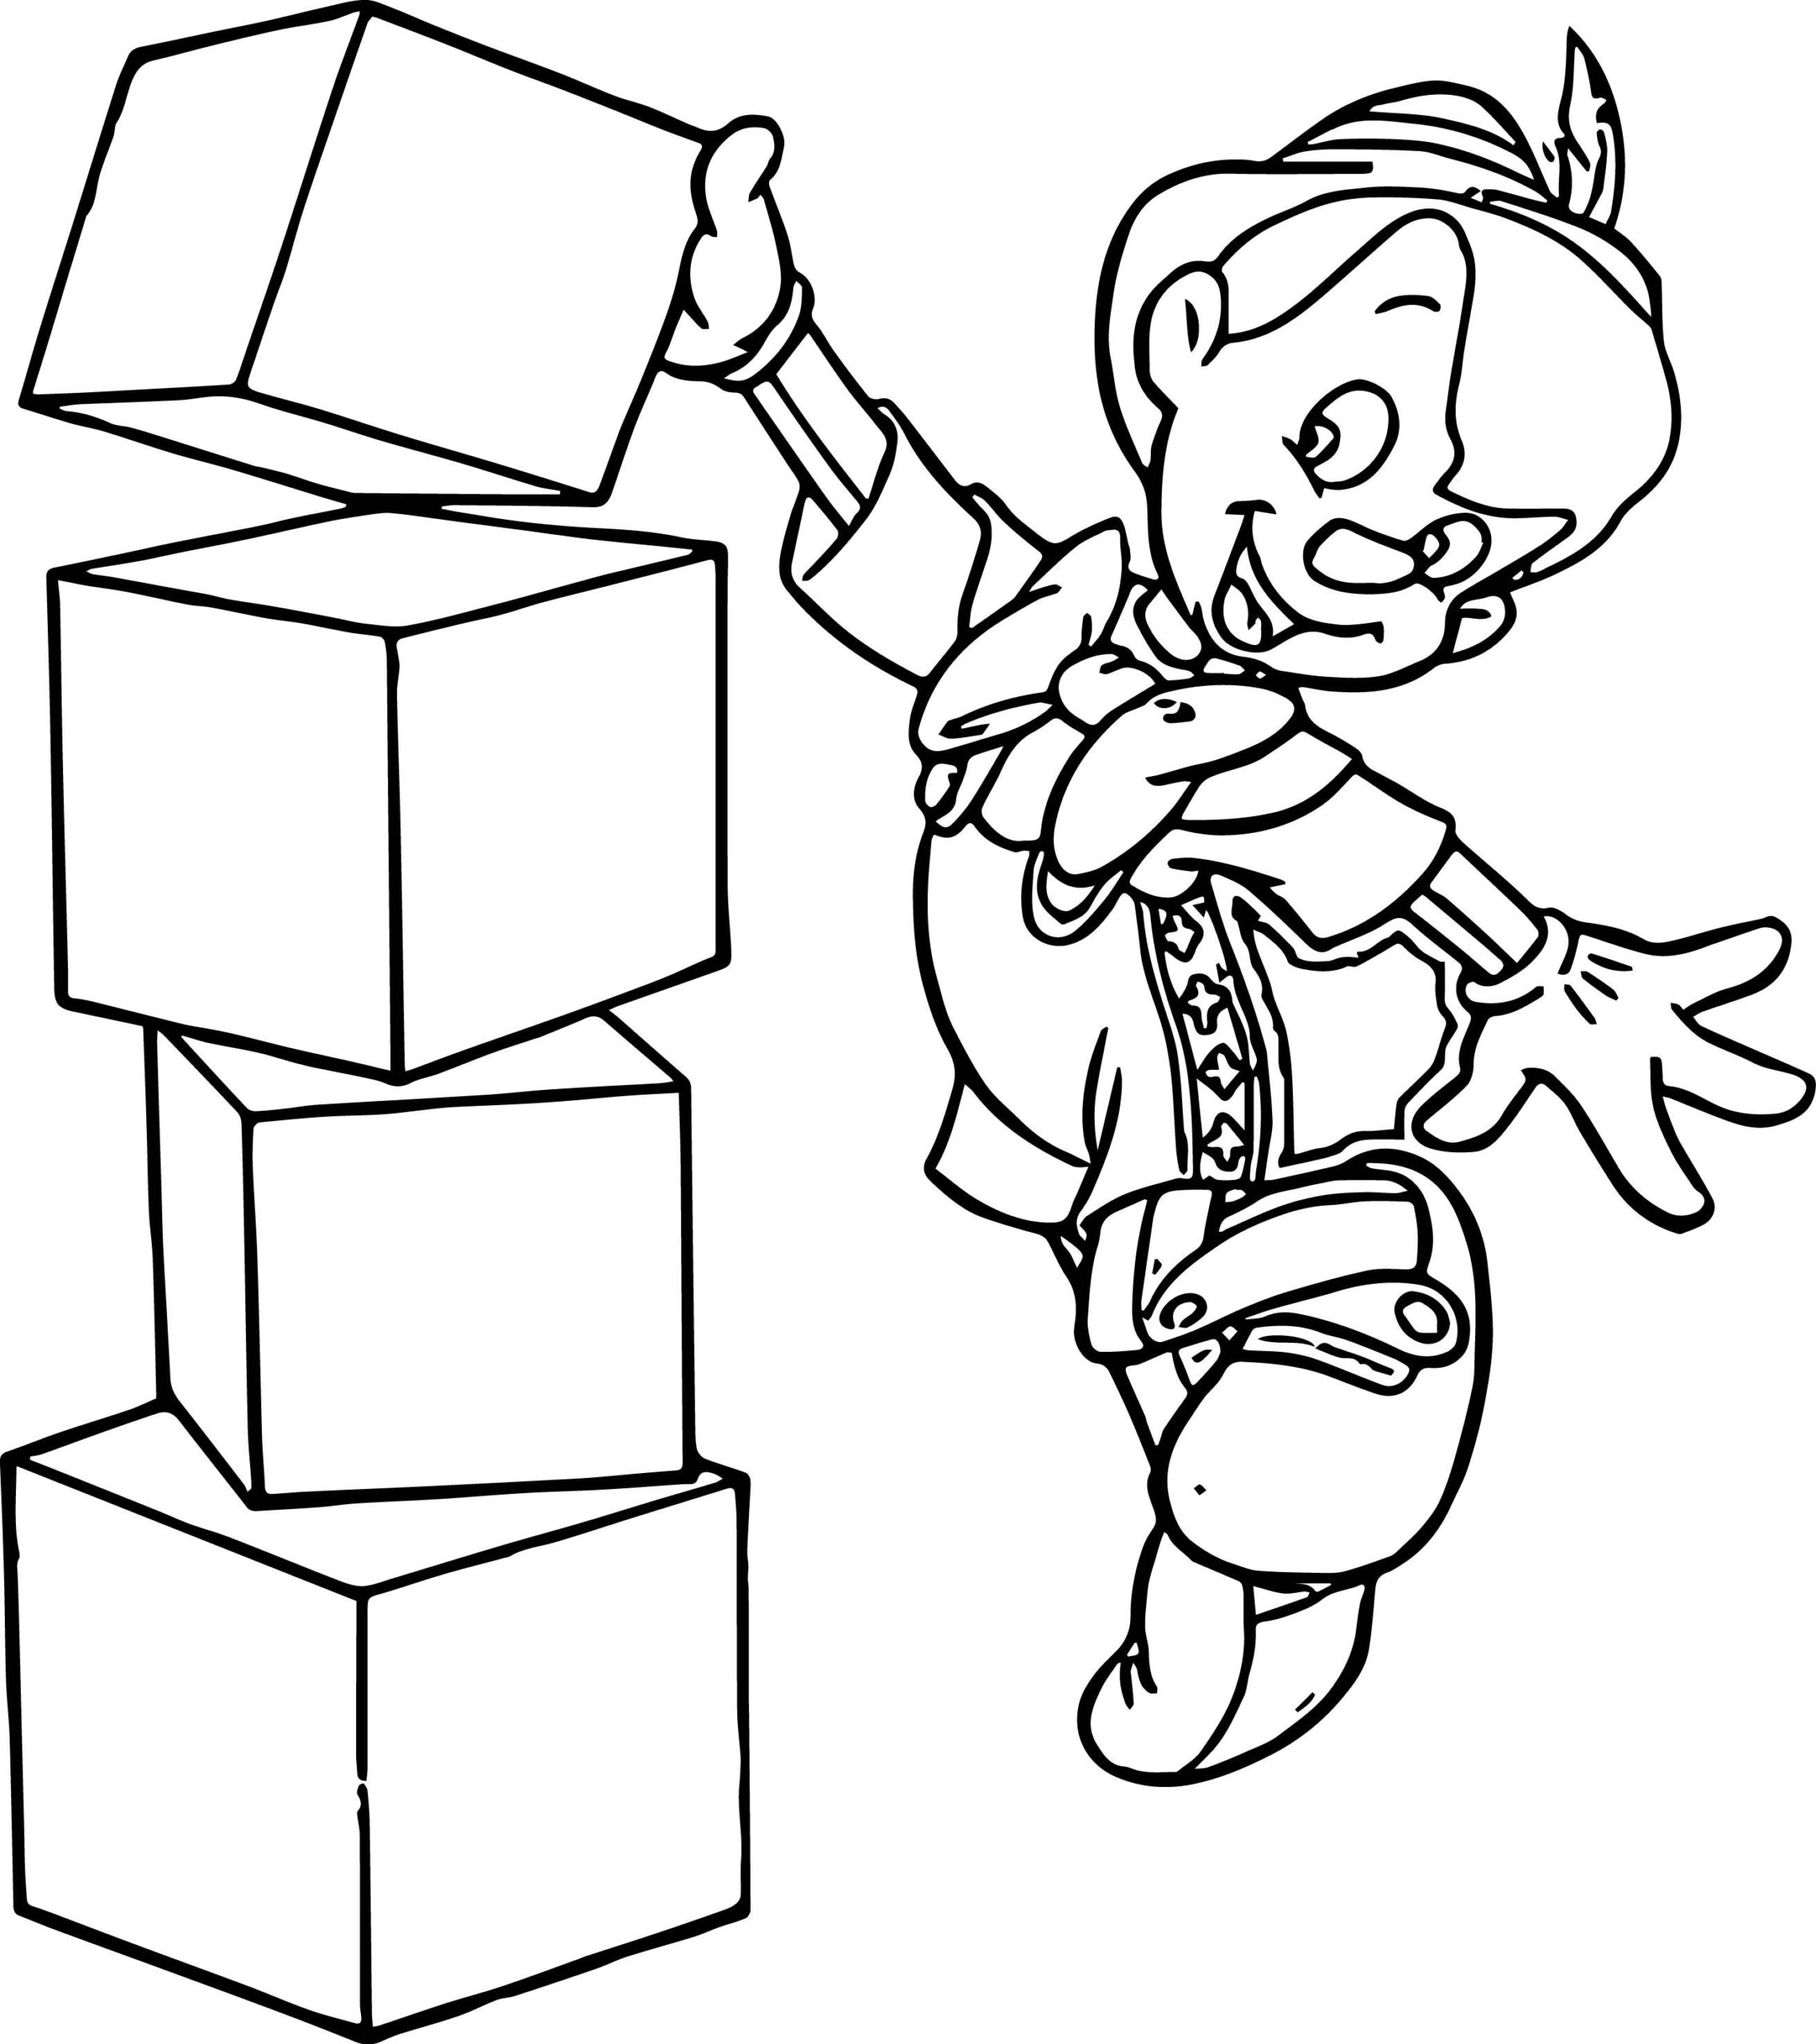 Coloring Pages : Pinocchio Doing Blocks Coloring Koala Pictures To ...